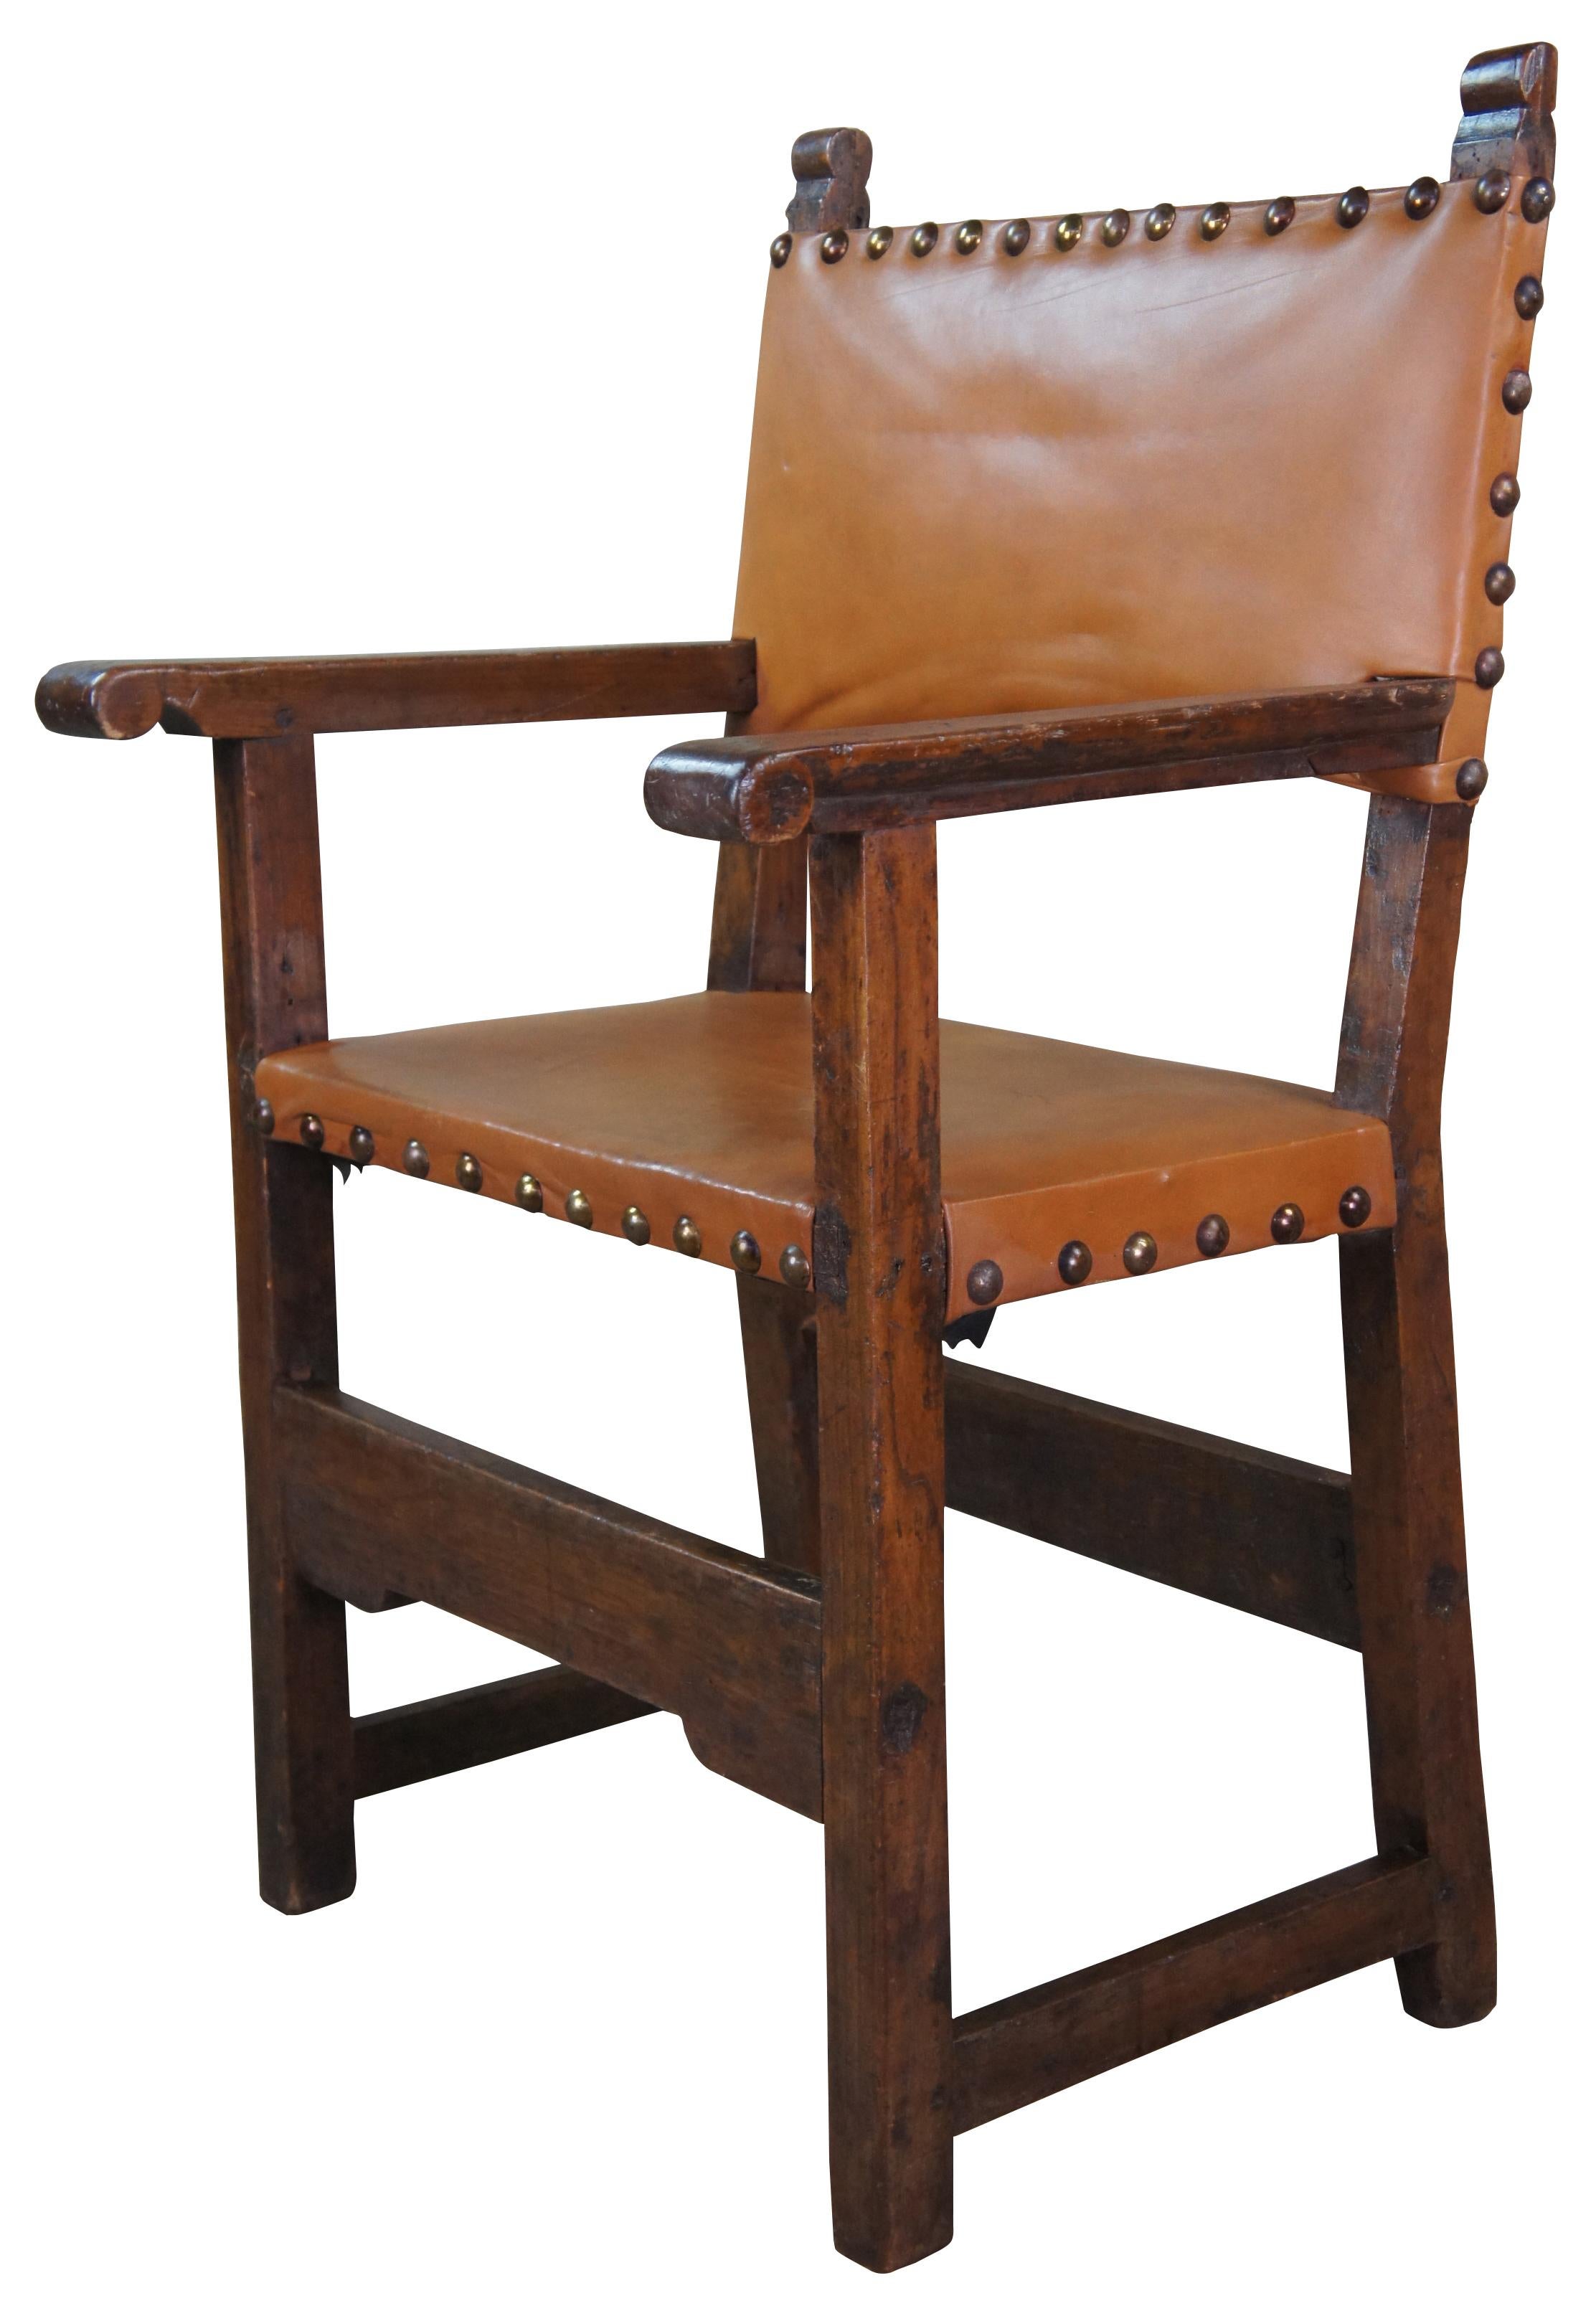 Early 18th century antique Spanish Colonial armchair with tongue and groove construction. Made of oak featuring classic form with simple ornamentation, and leather upholstery with nailhead trim. Sold by Newel Art Gallery of New York City,